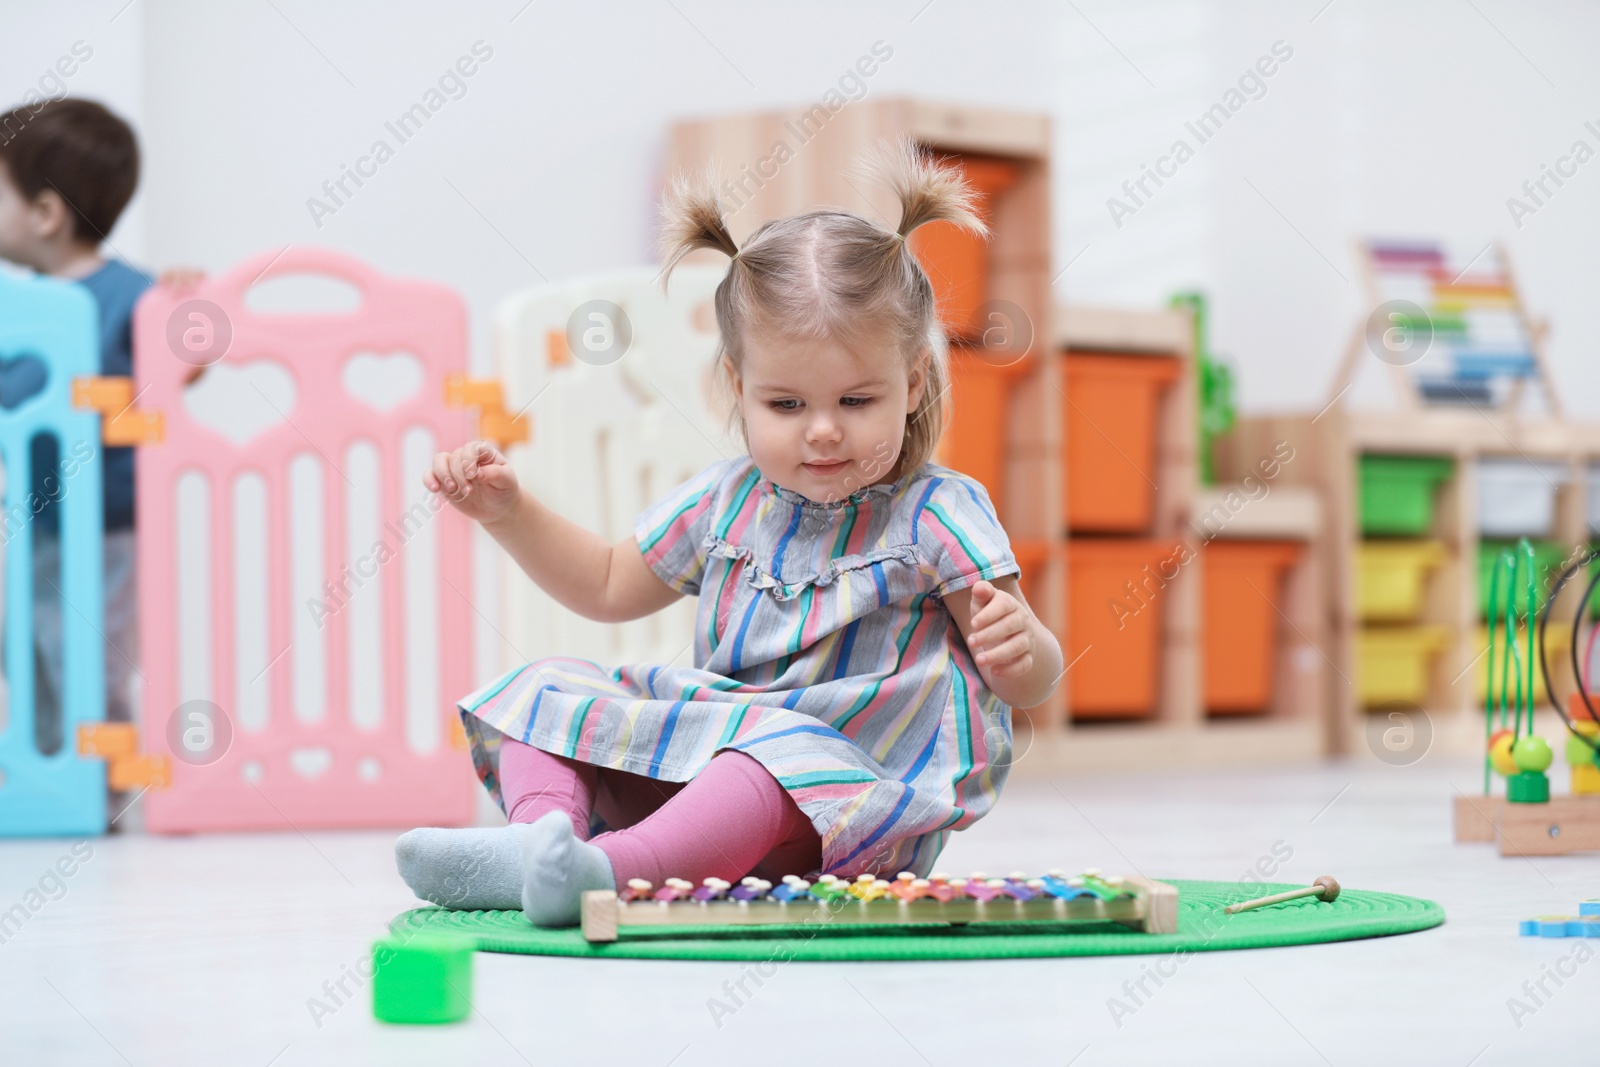 Photo of Cute little child playing with xylophone on floor